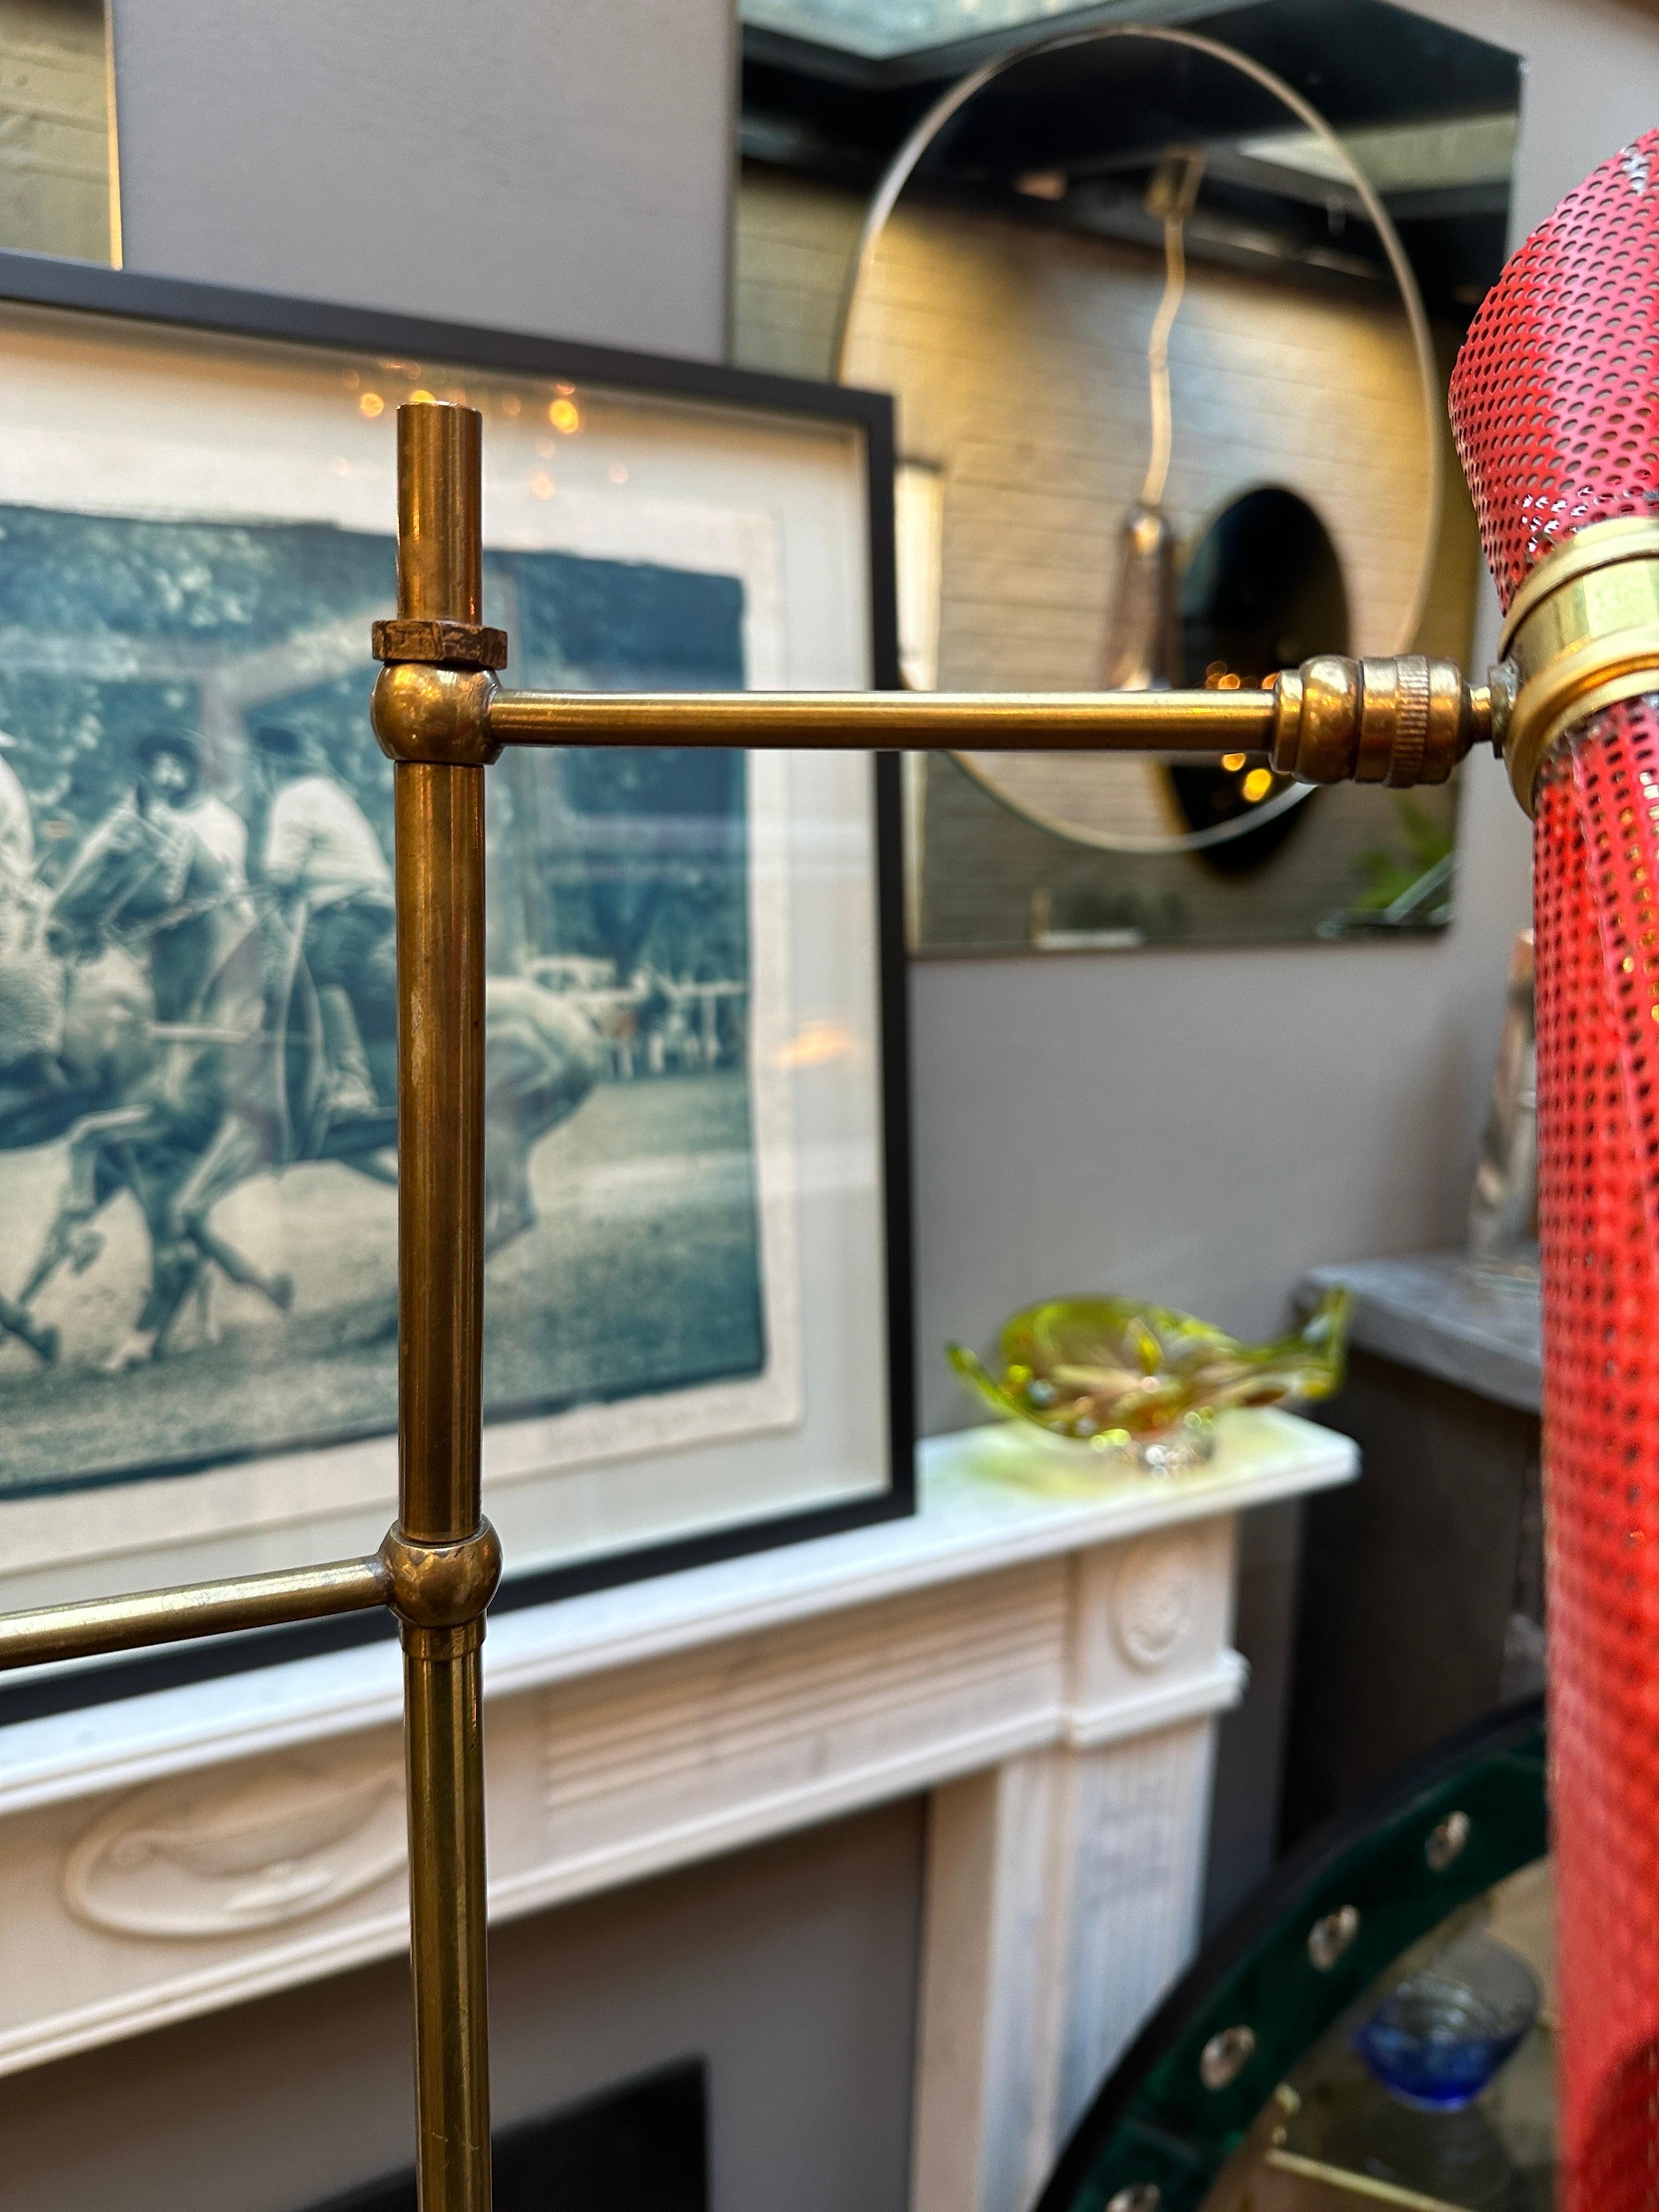 A French twin arm with tripod foot brass floor lamp. The adjustable and pivotable heads in red and yellow, the top arm able to move round the stem to give different lighting. The shades perforated. The stem and tripod foot in slender simply designed